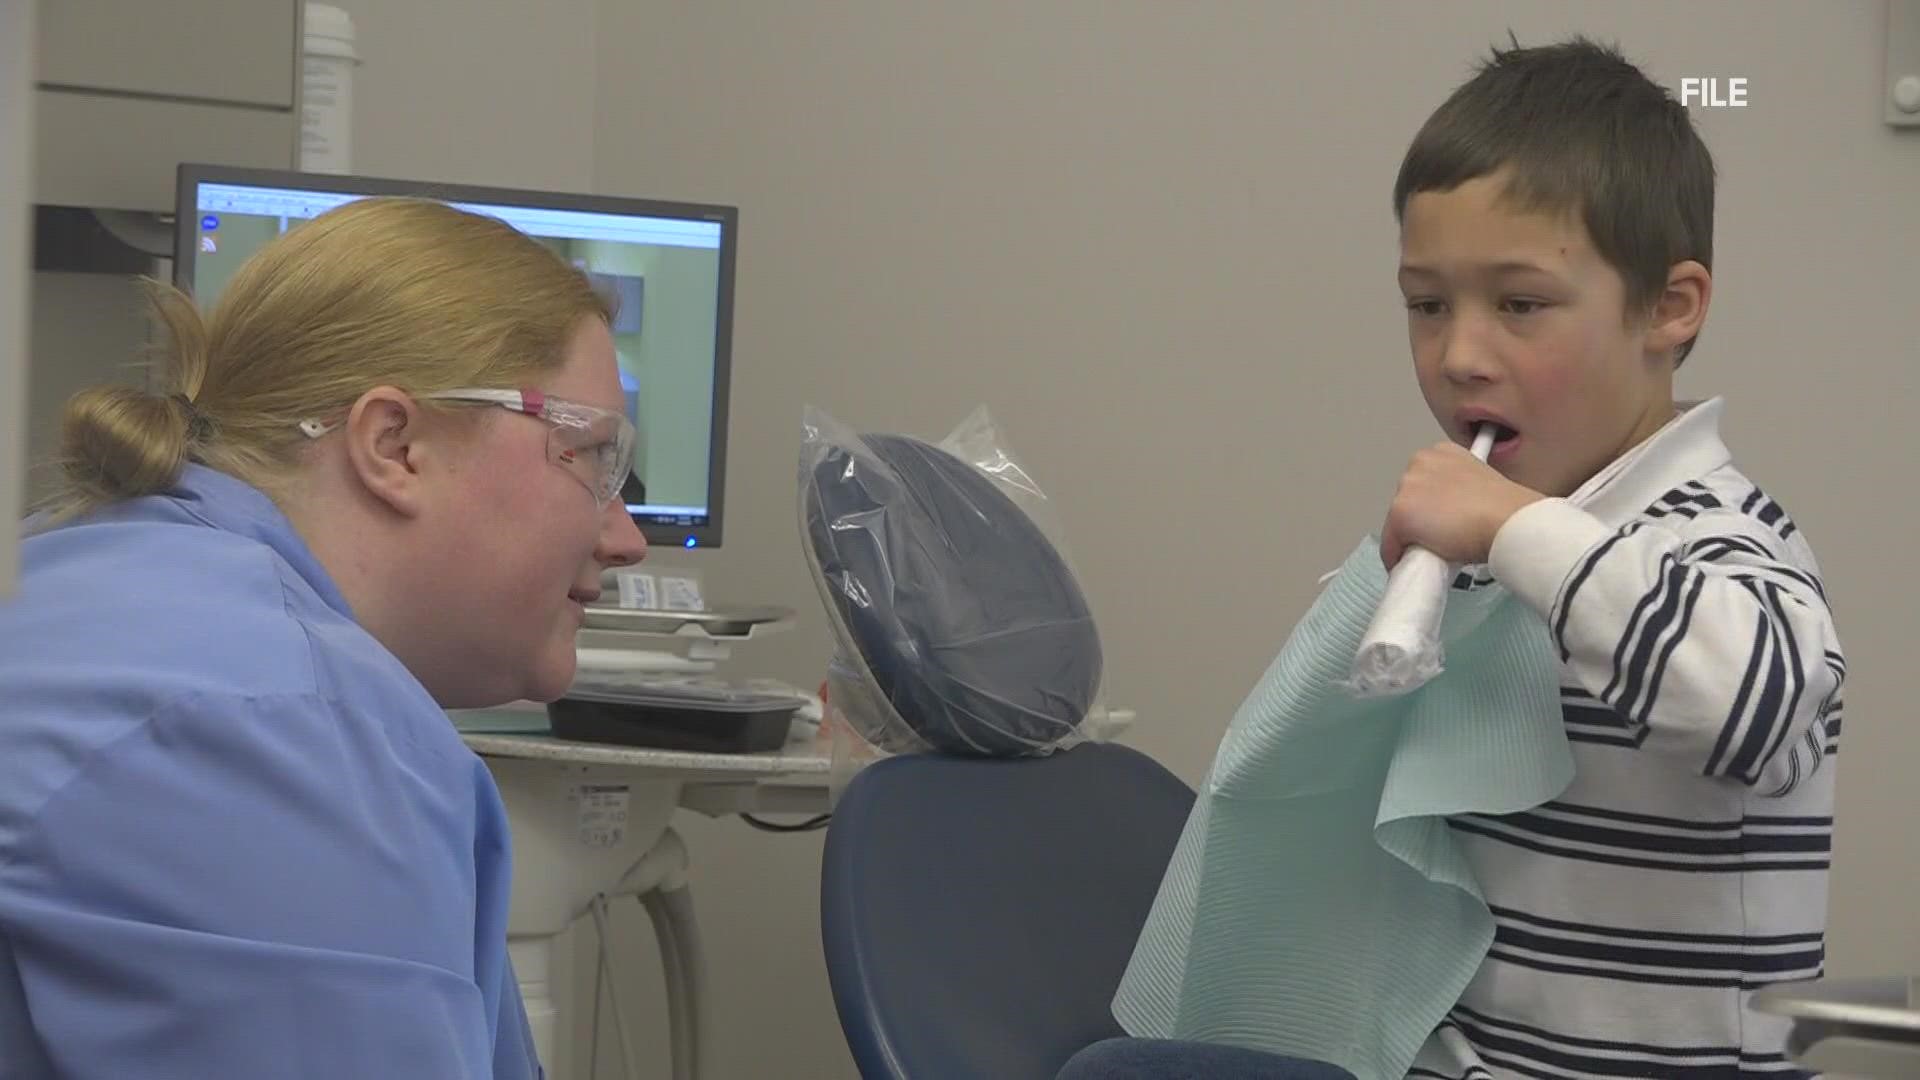 It's a day when kids ages 5 to 18 who don't have a dentist can get an appointment and benefit from free cleanings, exams, x-rays, and more.